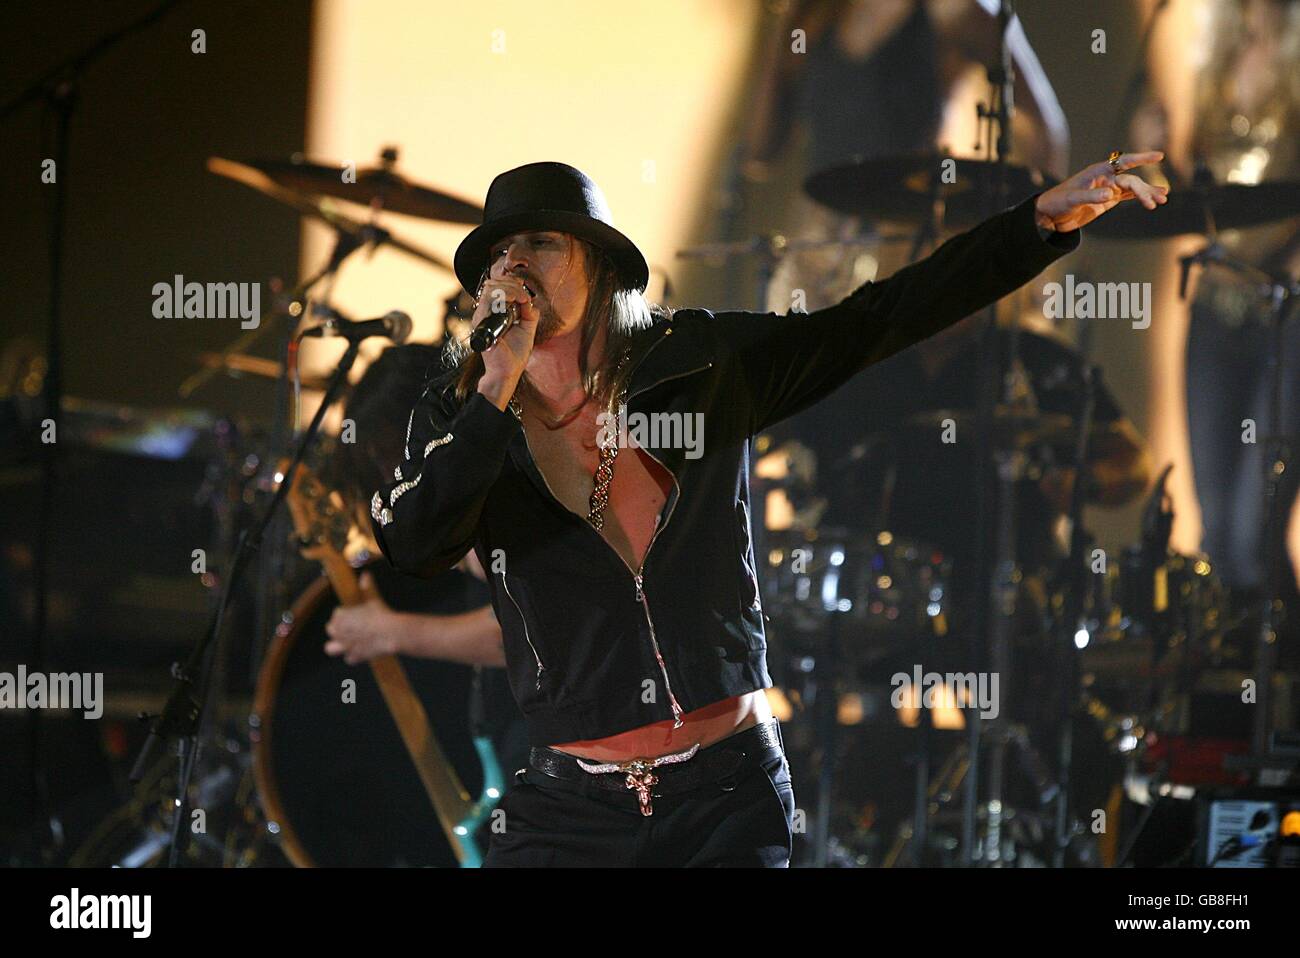 MTV Europe Music Video Awards - Show - Liverpool. Kid Rock performs on stage during the 2008 MTV Europe Music Video Awards at the Echo Arena, Liverpool. Stock Photo